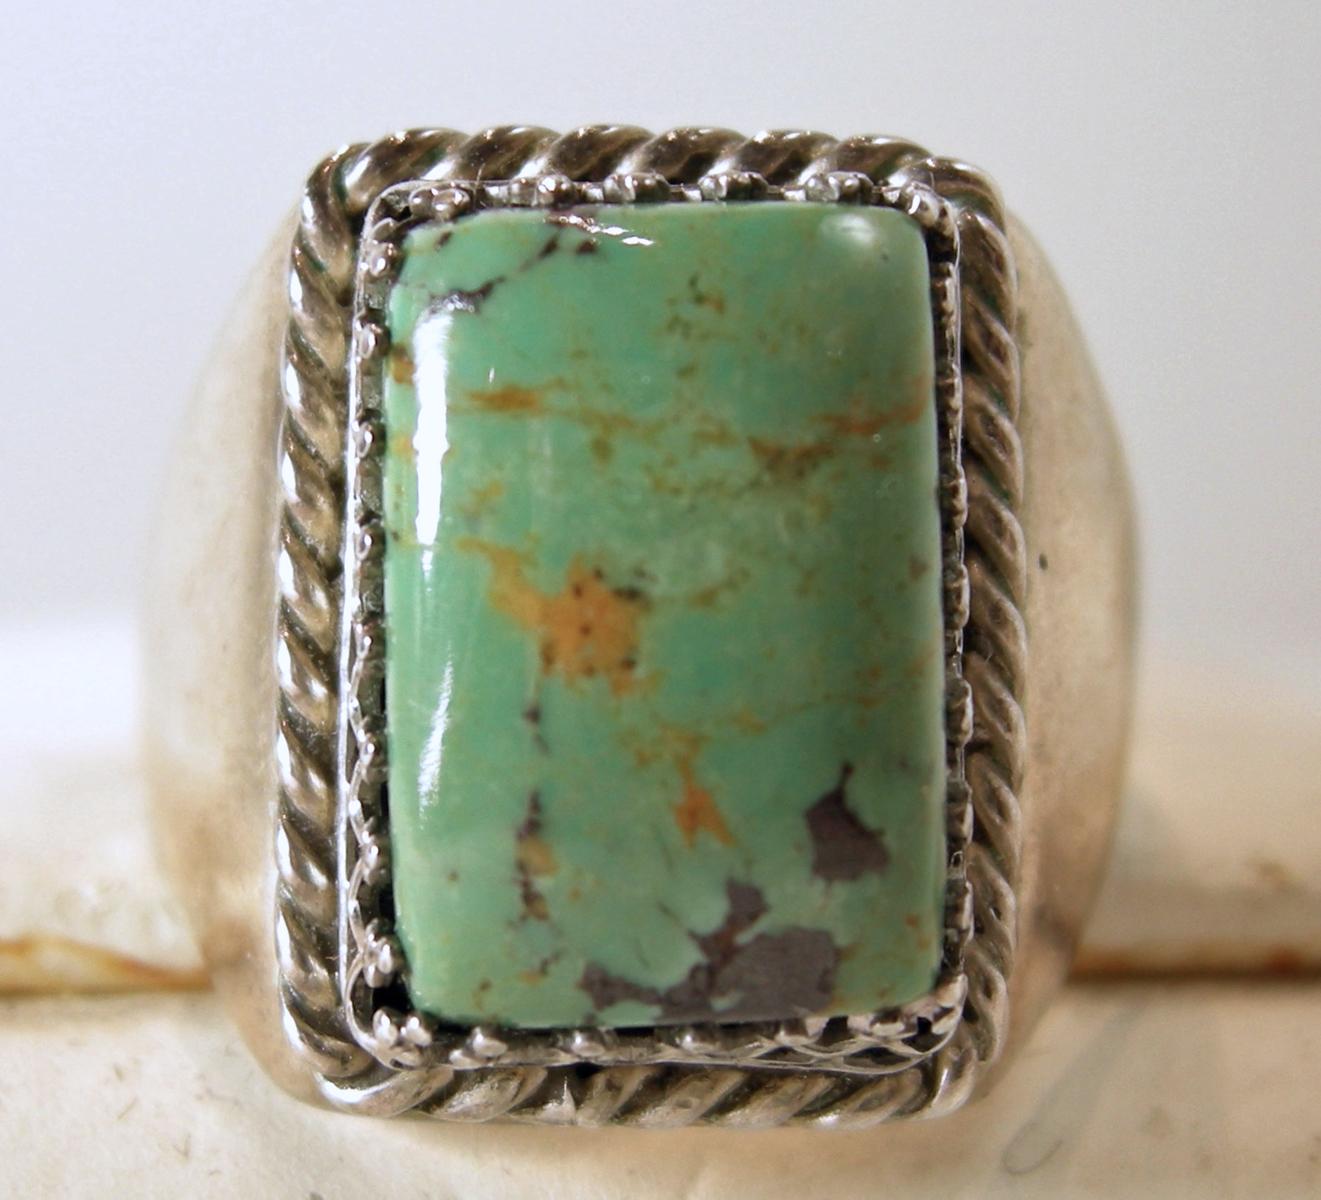 This vintage Navajo American Indian ring has a green turquoise with a sterling silver ribbed border.  It is a size 11-1/2 and measures 3/4